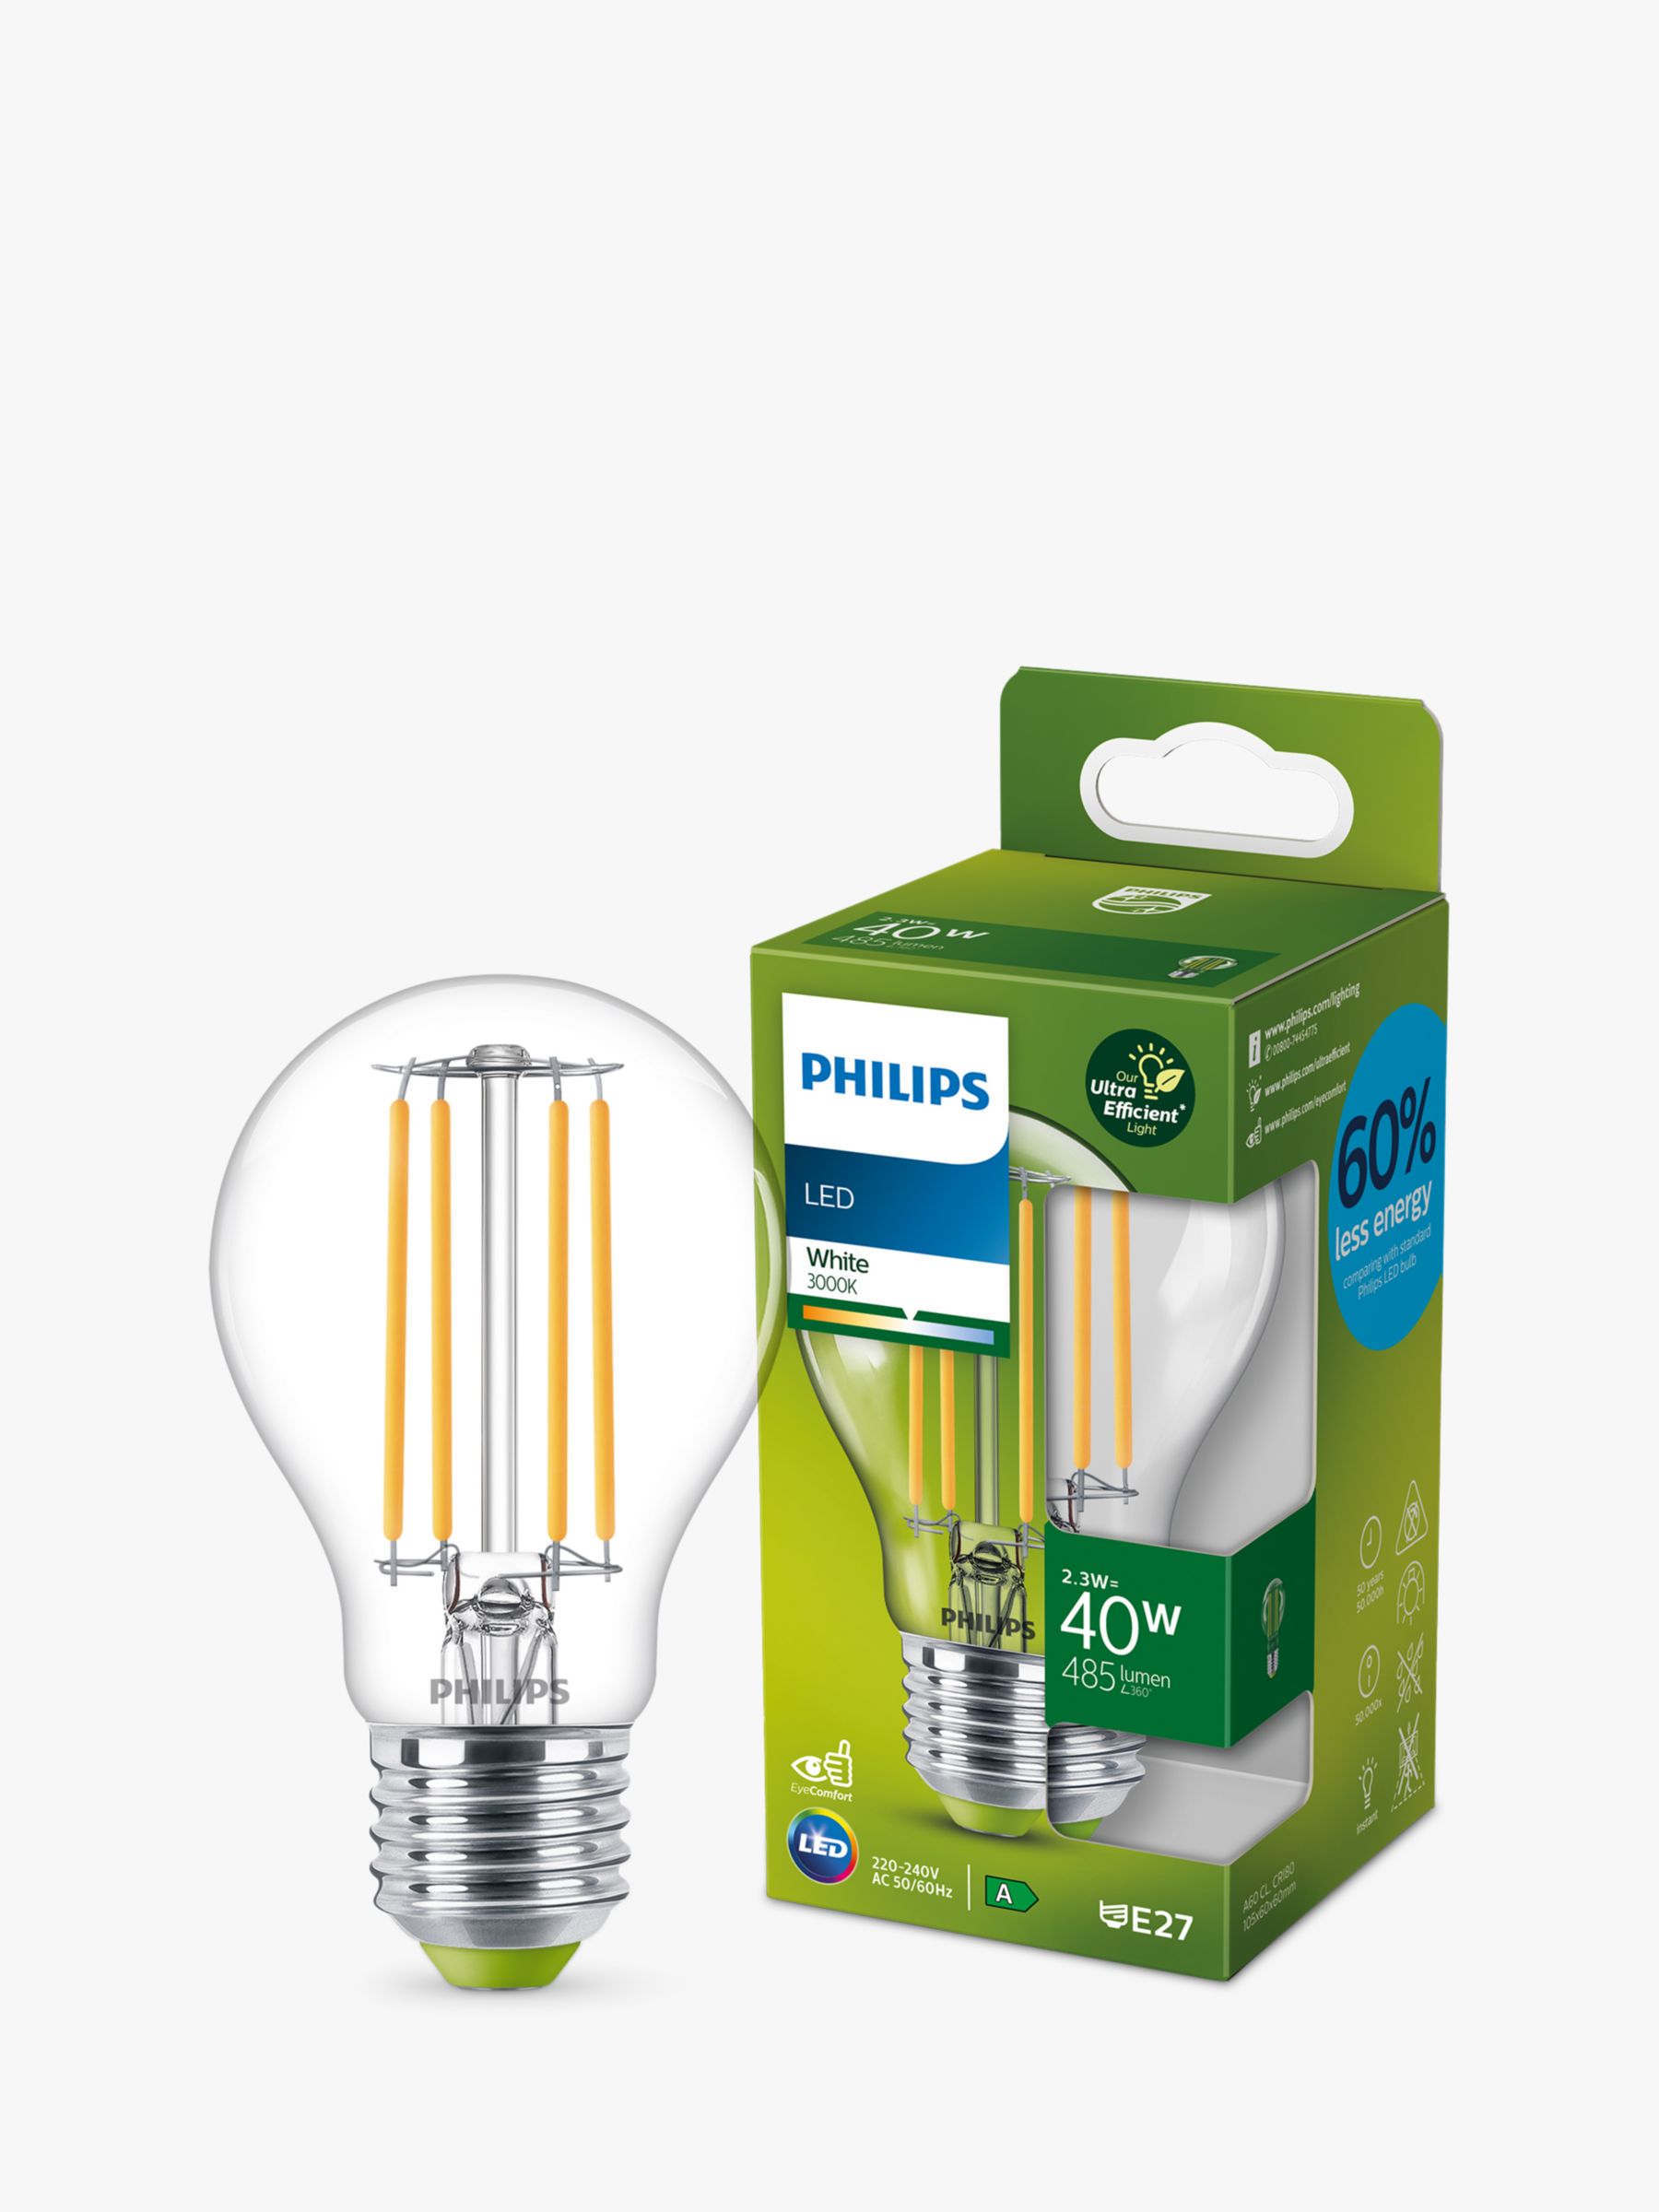 Philips Energy 2.3W E27 LED Non-Dimmable Classic Bulb, Clear